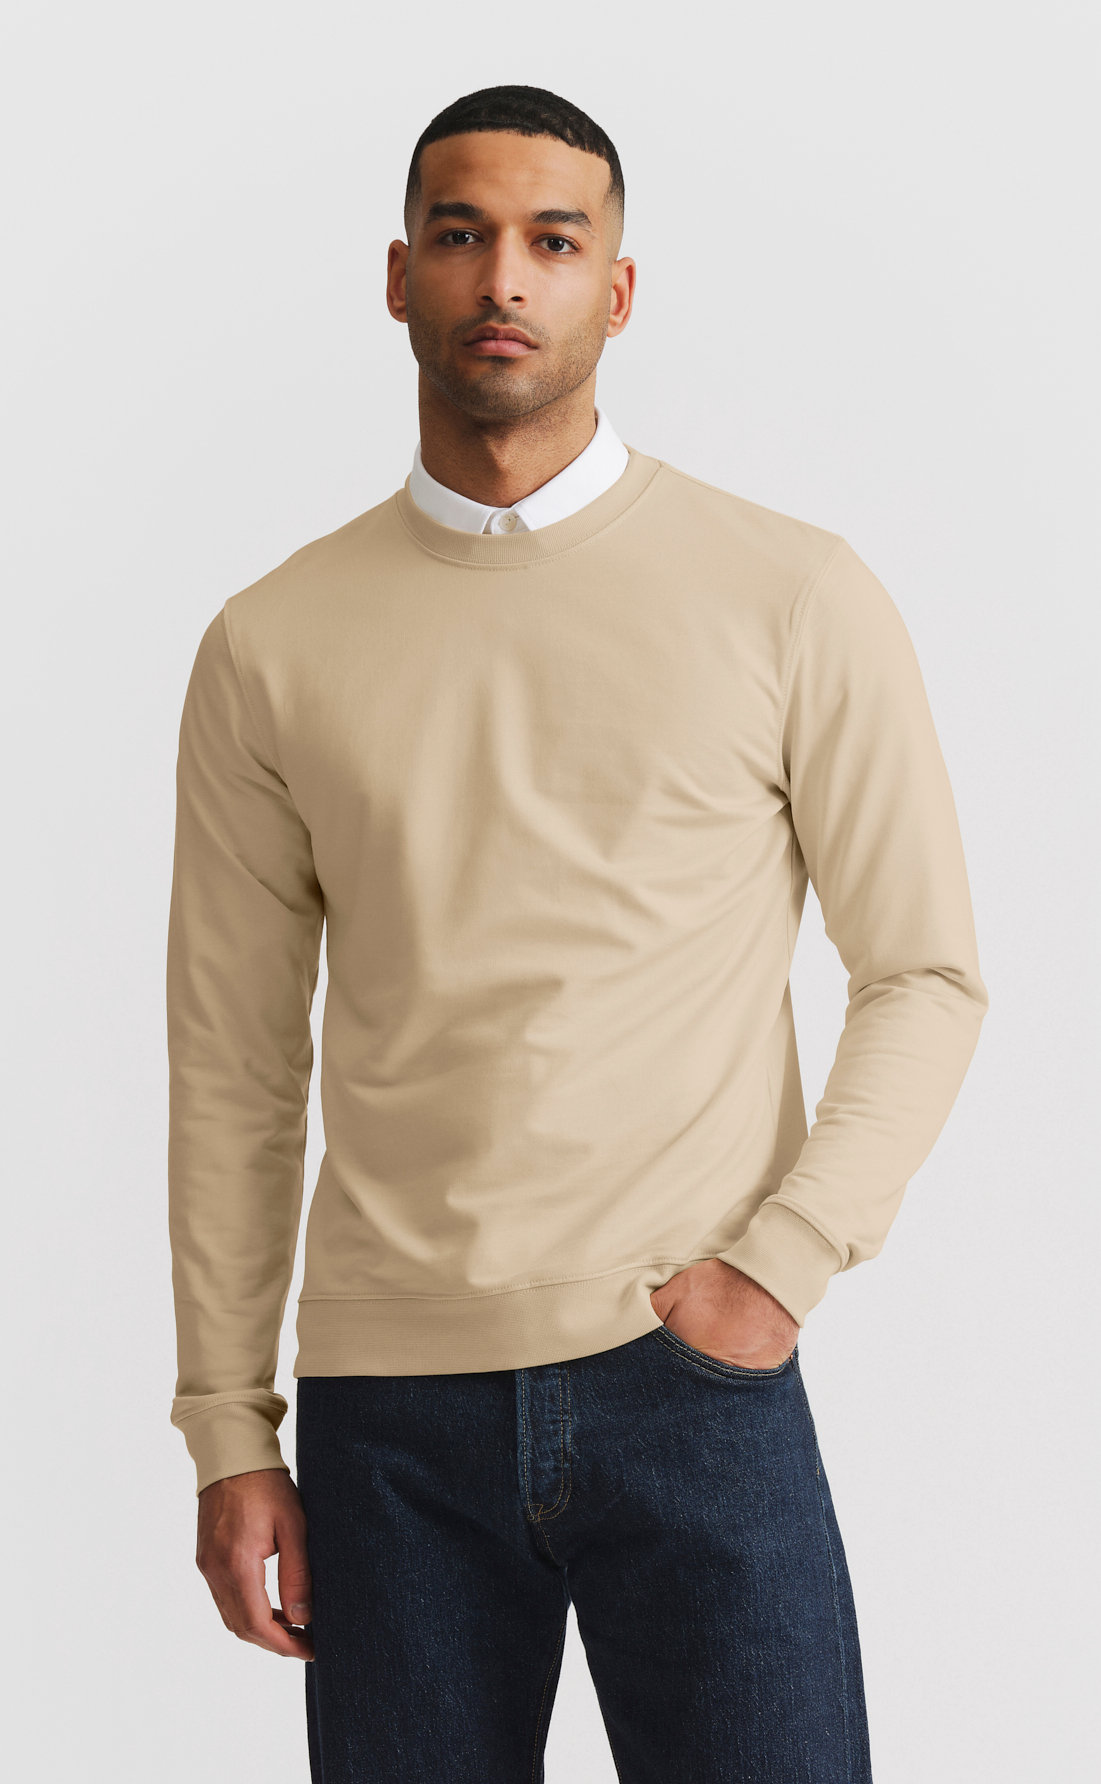 Custom Fitted Cotton Sweatshirt Oxford Tan | Son of a Tailor